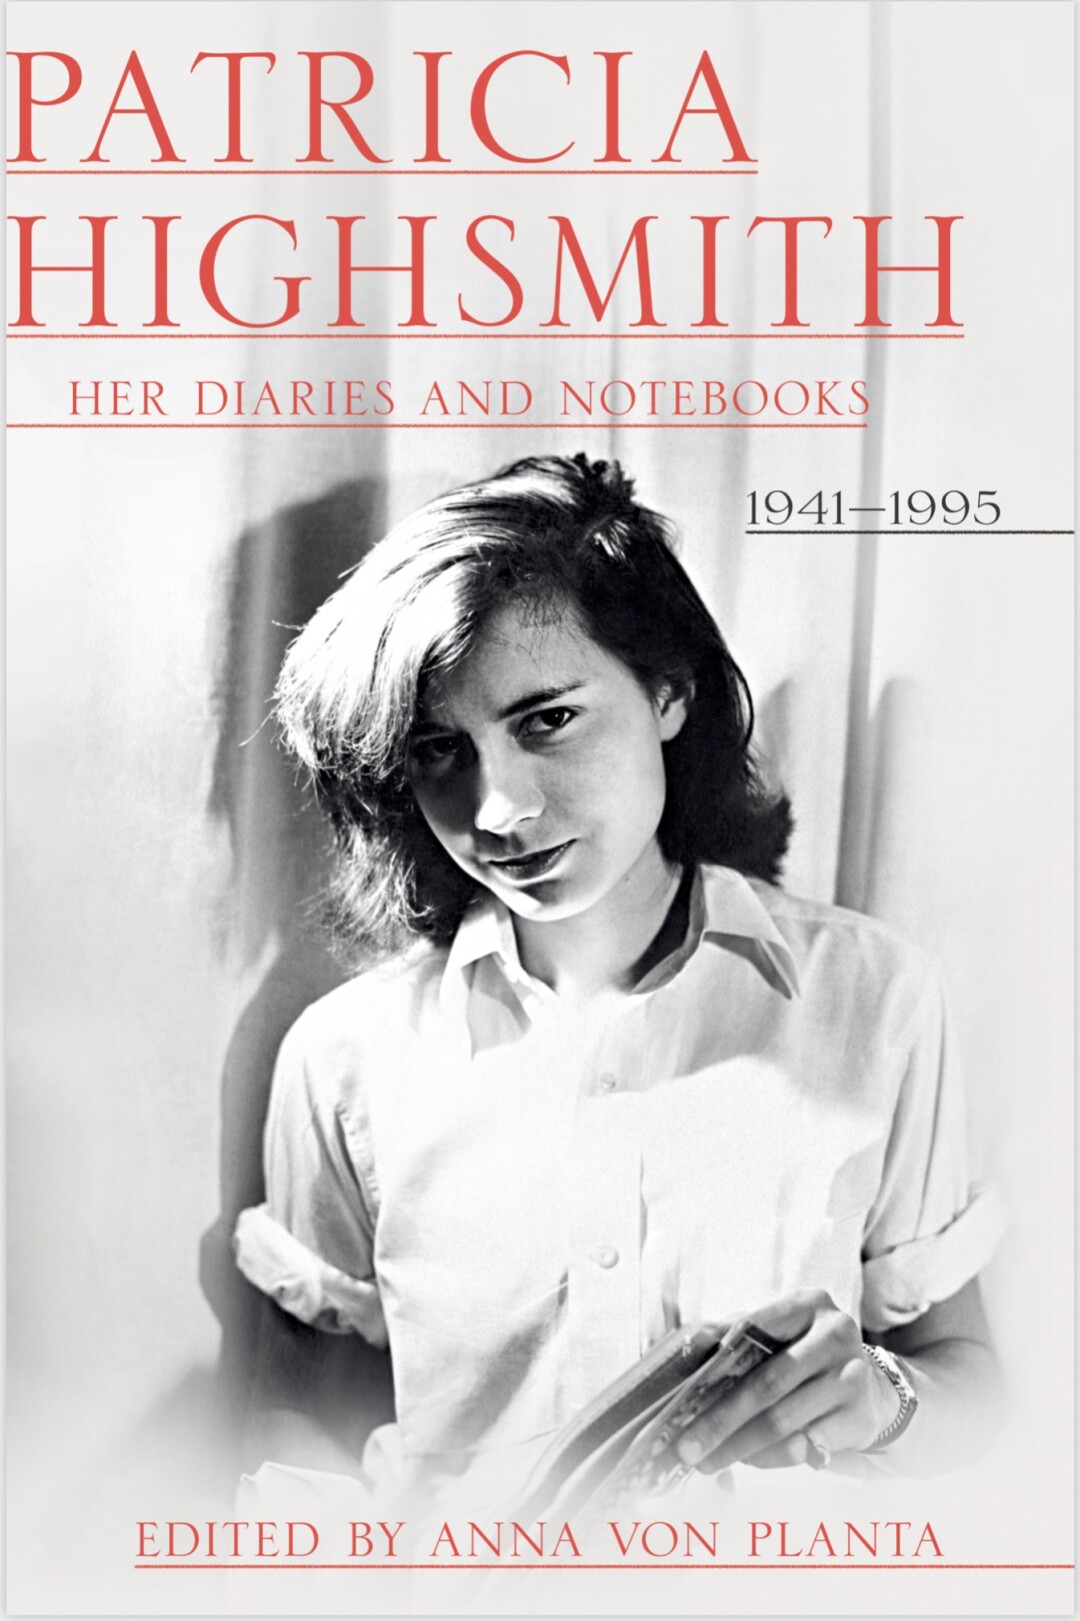 Book cover for "Patricia Highsmith: Her Diaries and Notebooks: 1941-1995"...